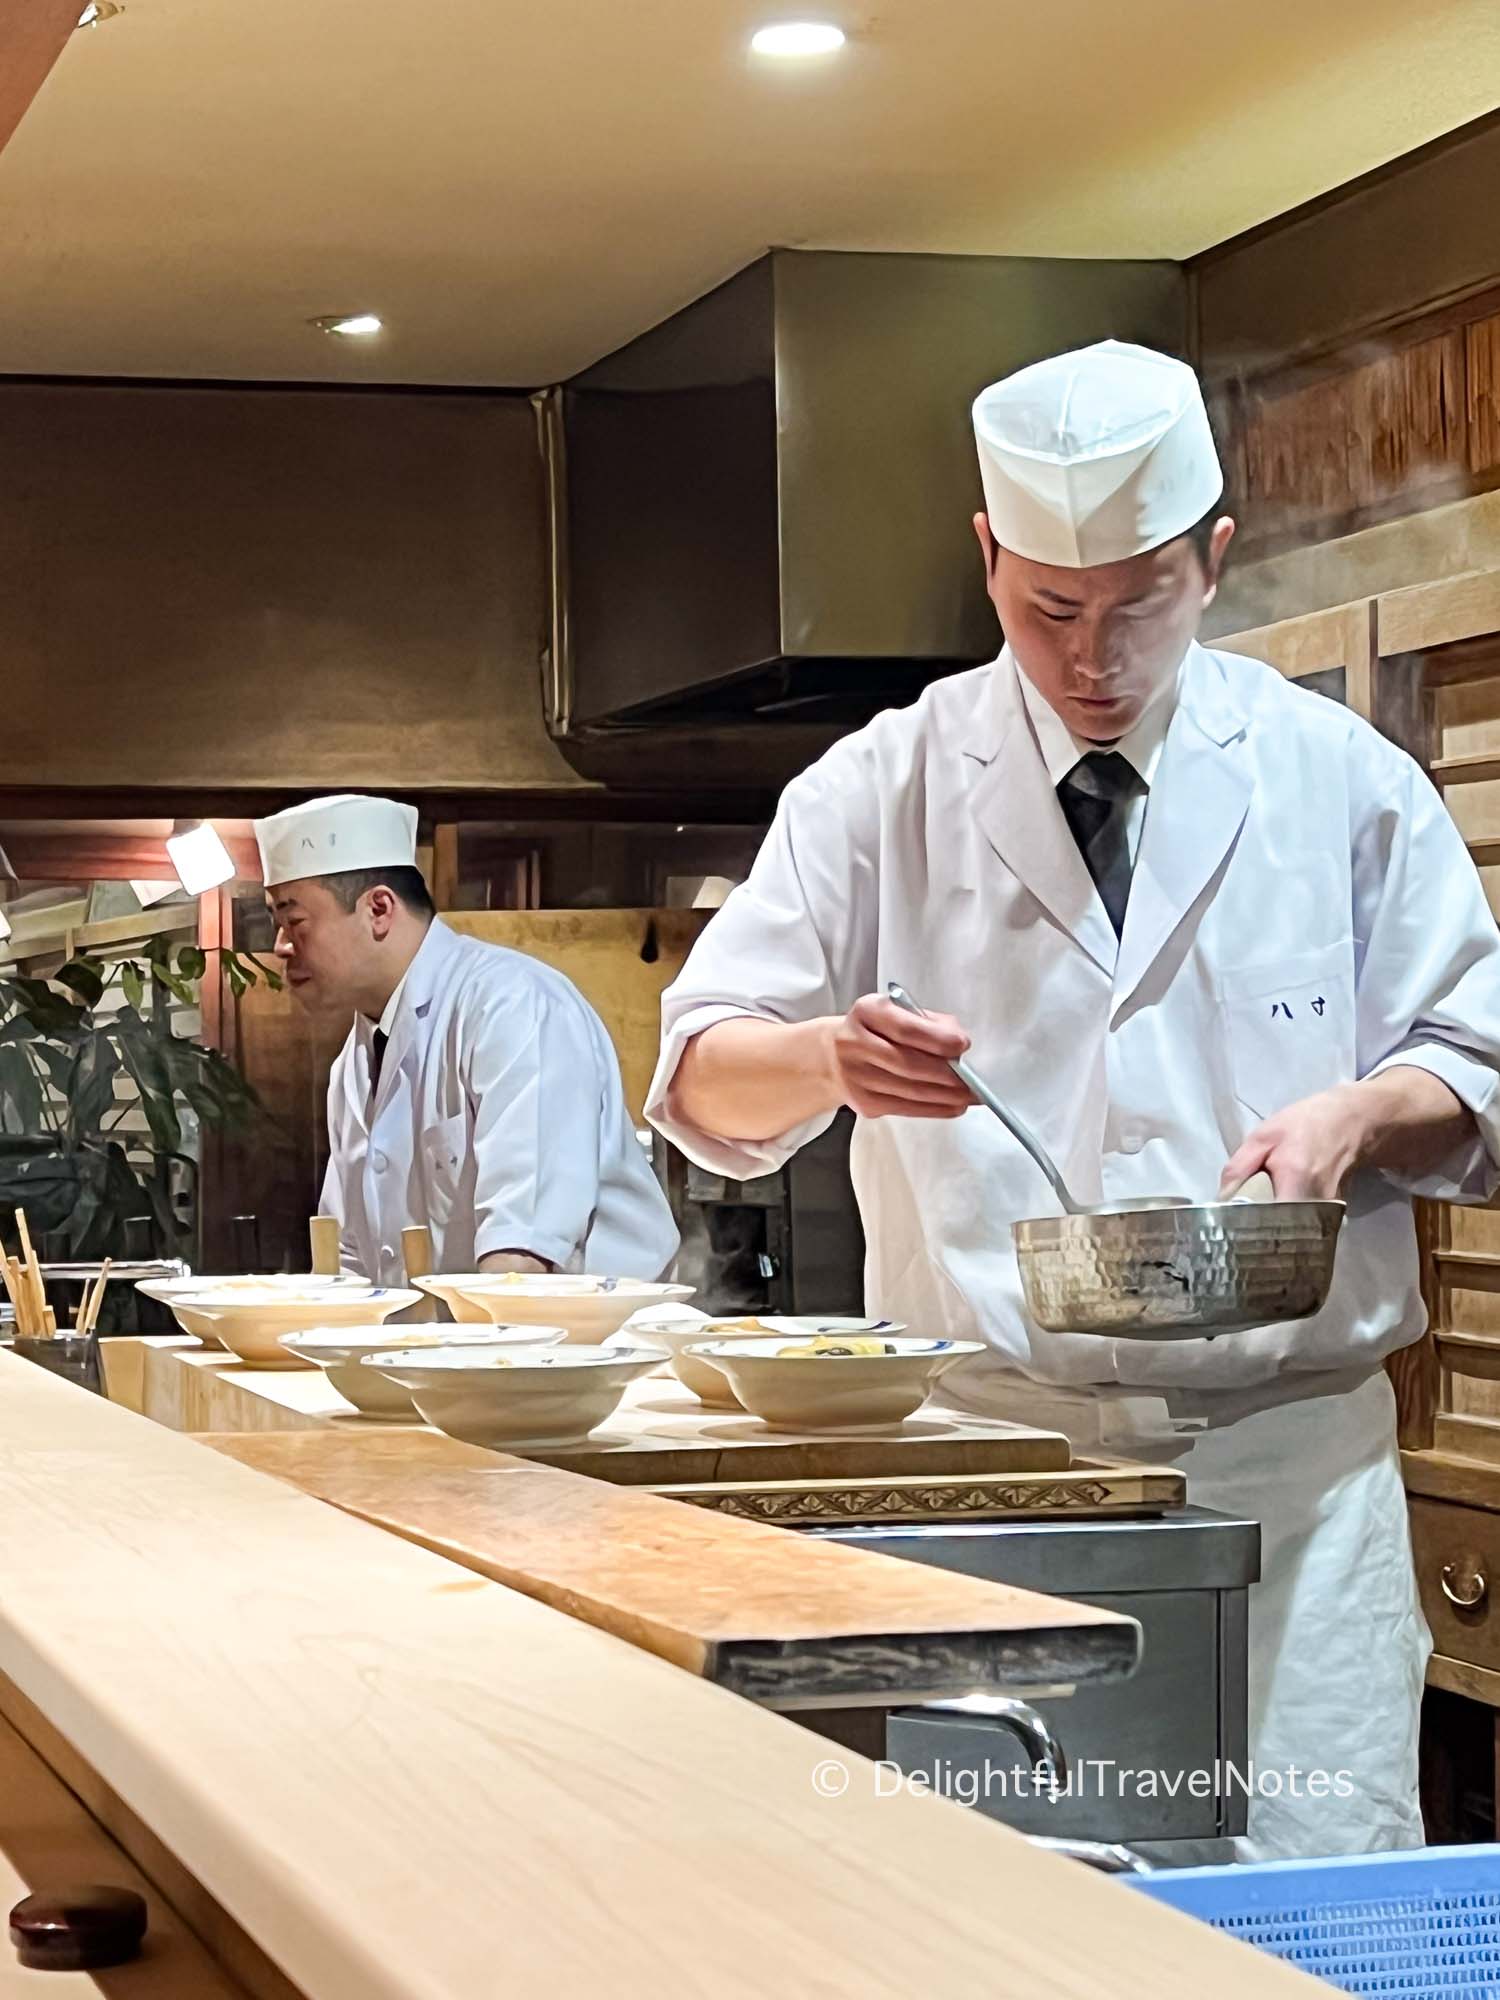 Hassun chef and his assistant preparing food at the counter.